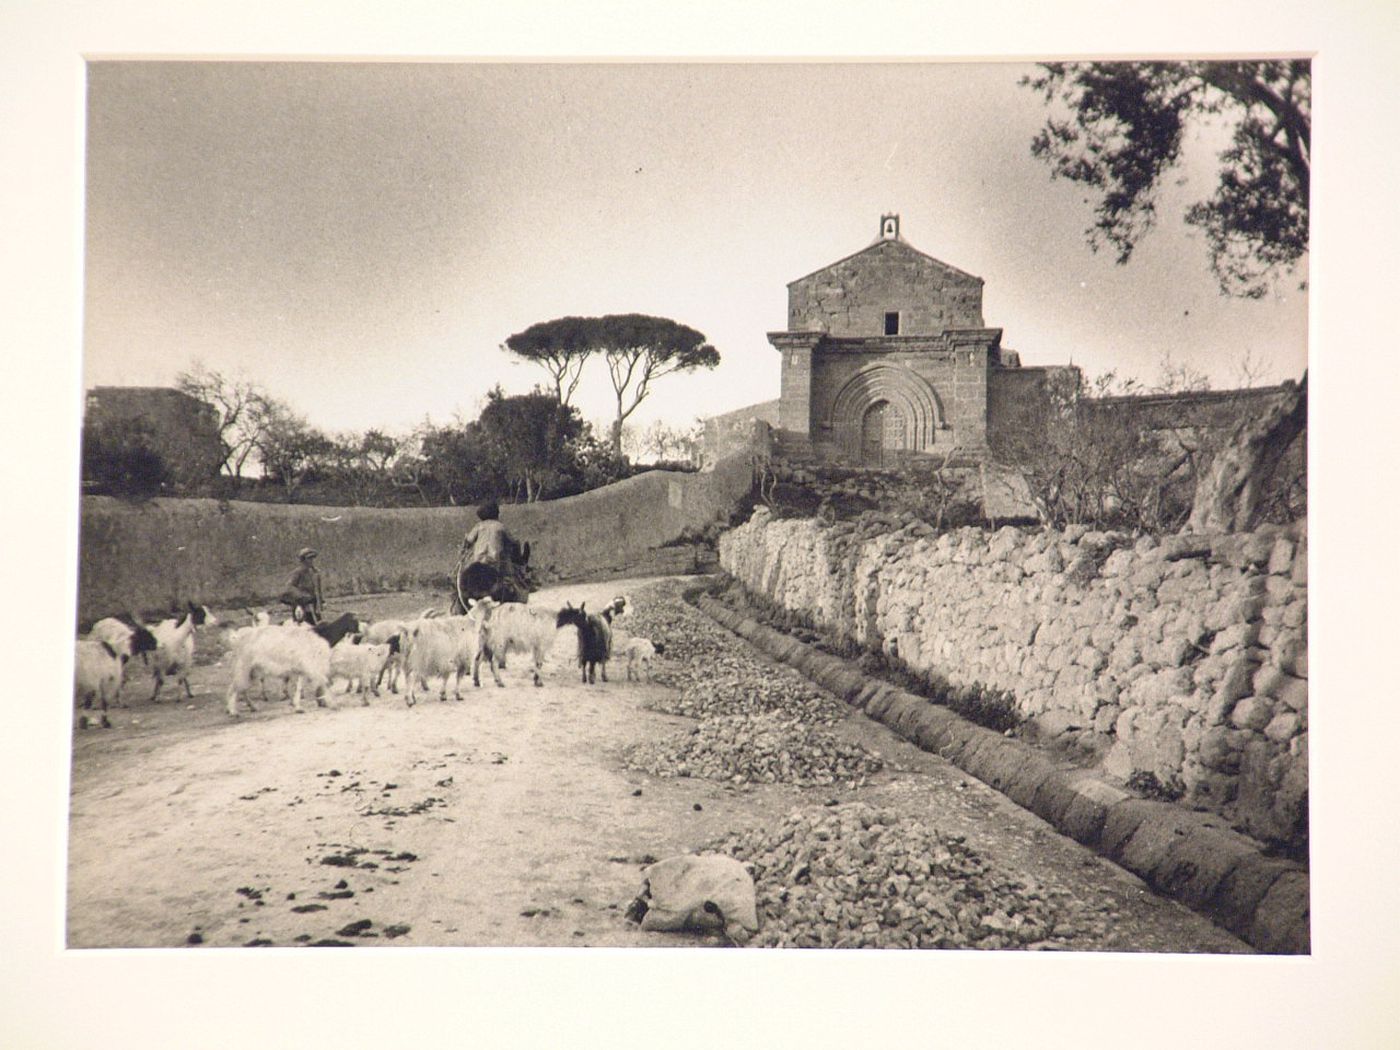 View of goats and goatherds on stone wall-bordered road, with small romanesque church in background, Italy ?